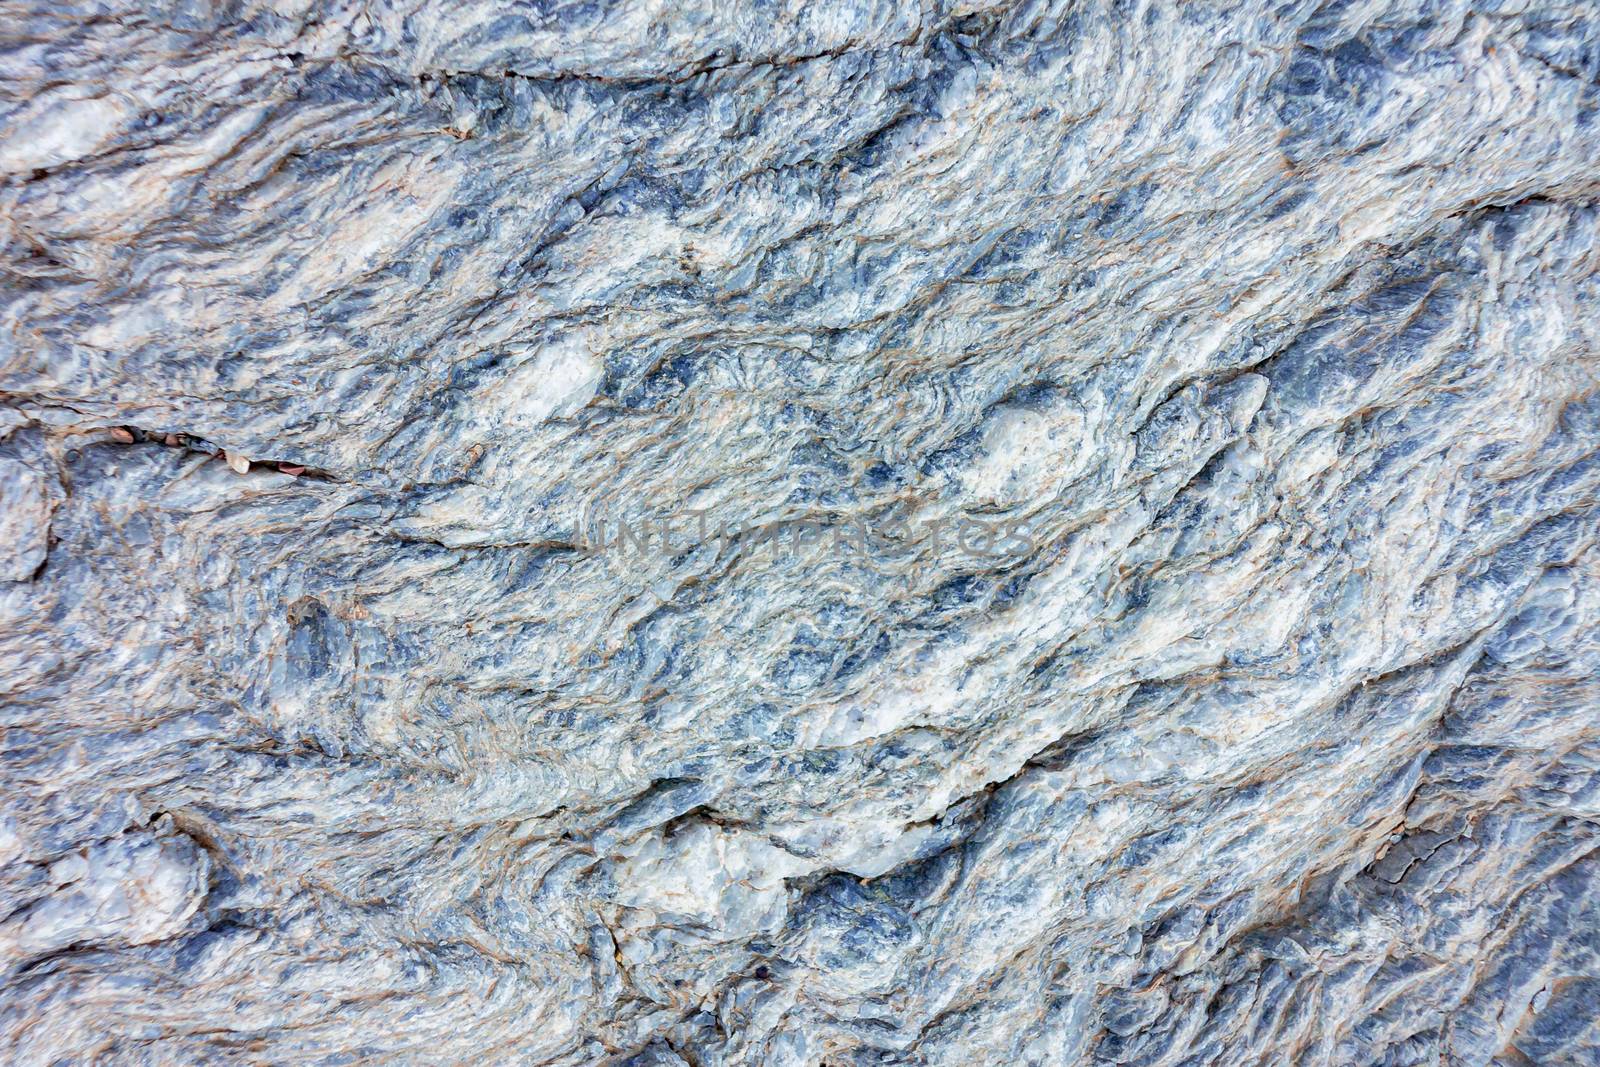 Slate stone surface in the mountains near Muscat, Oman.